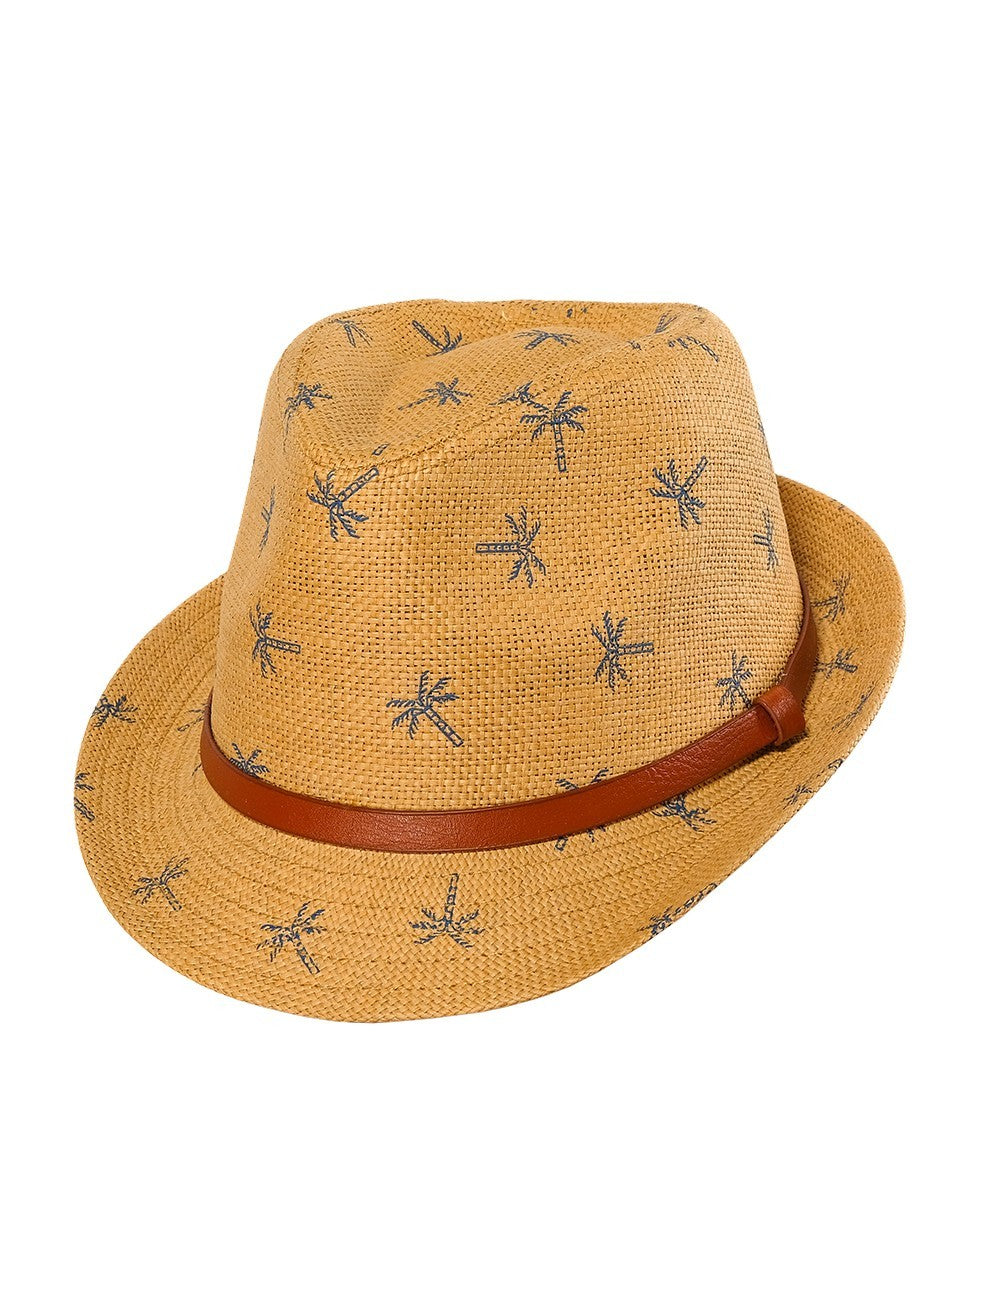 Maximo - Trilby straw hat palm trees